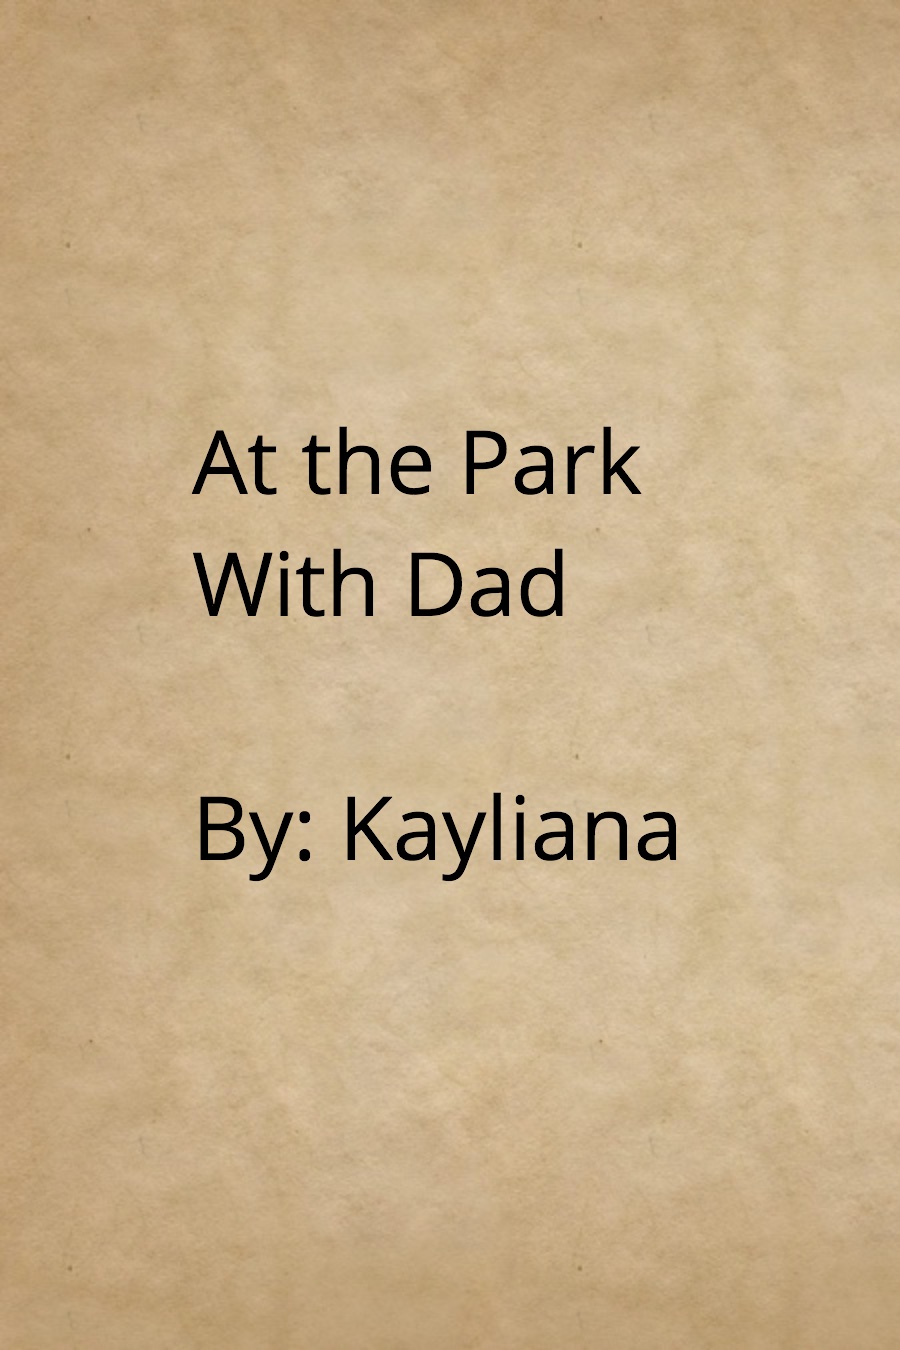 At the Park With Dad by Kayliana P